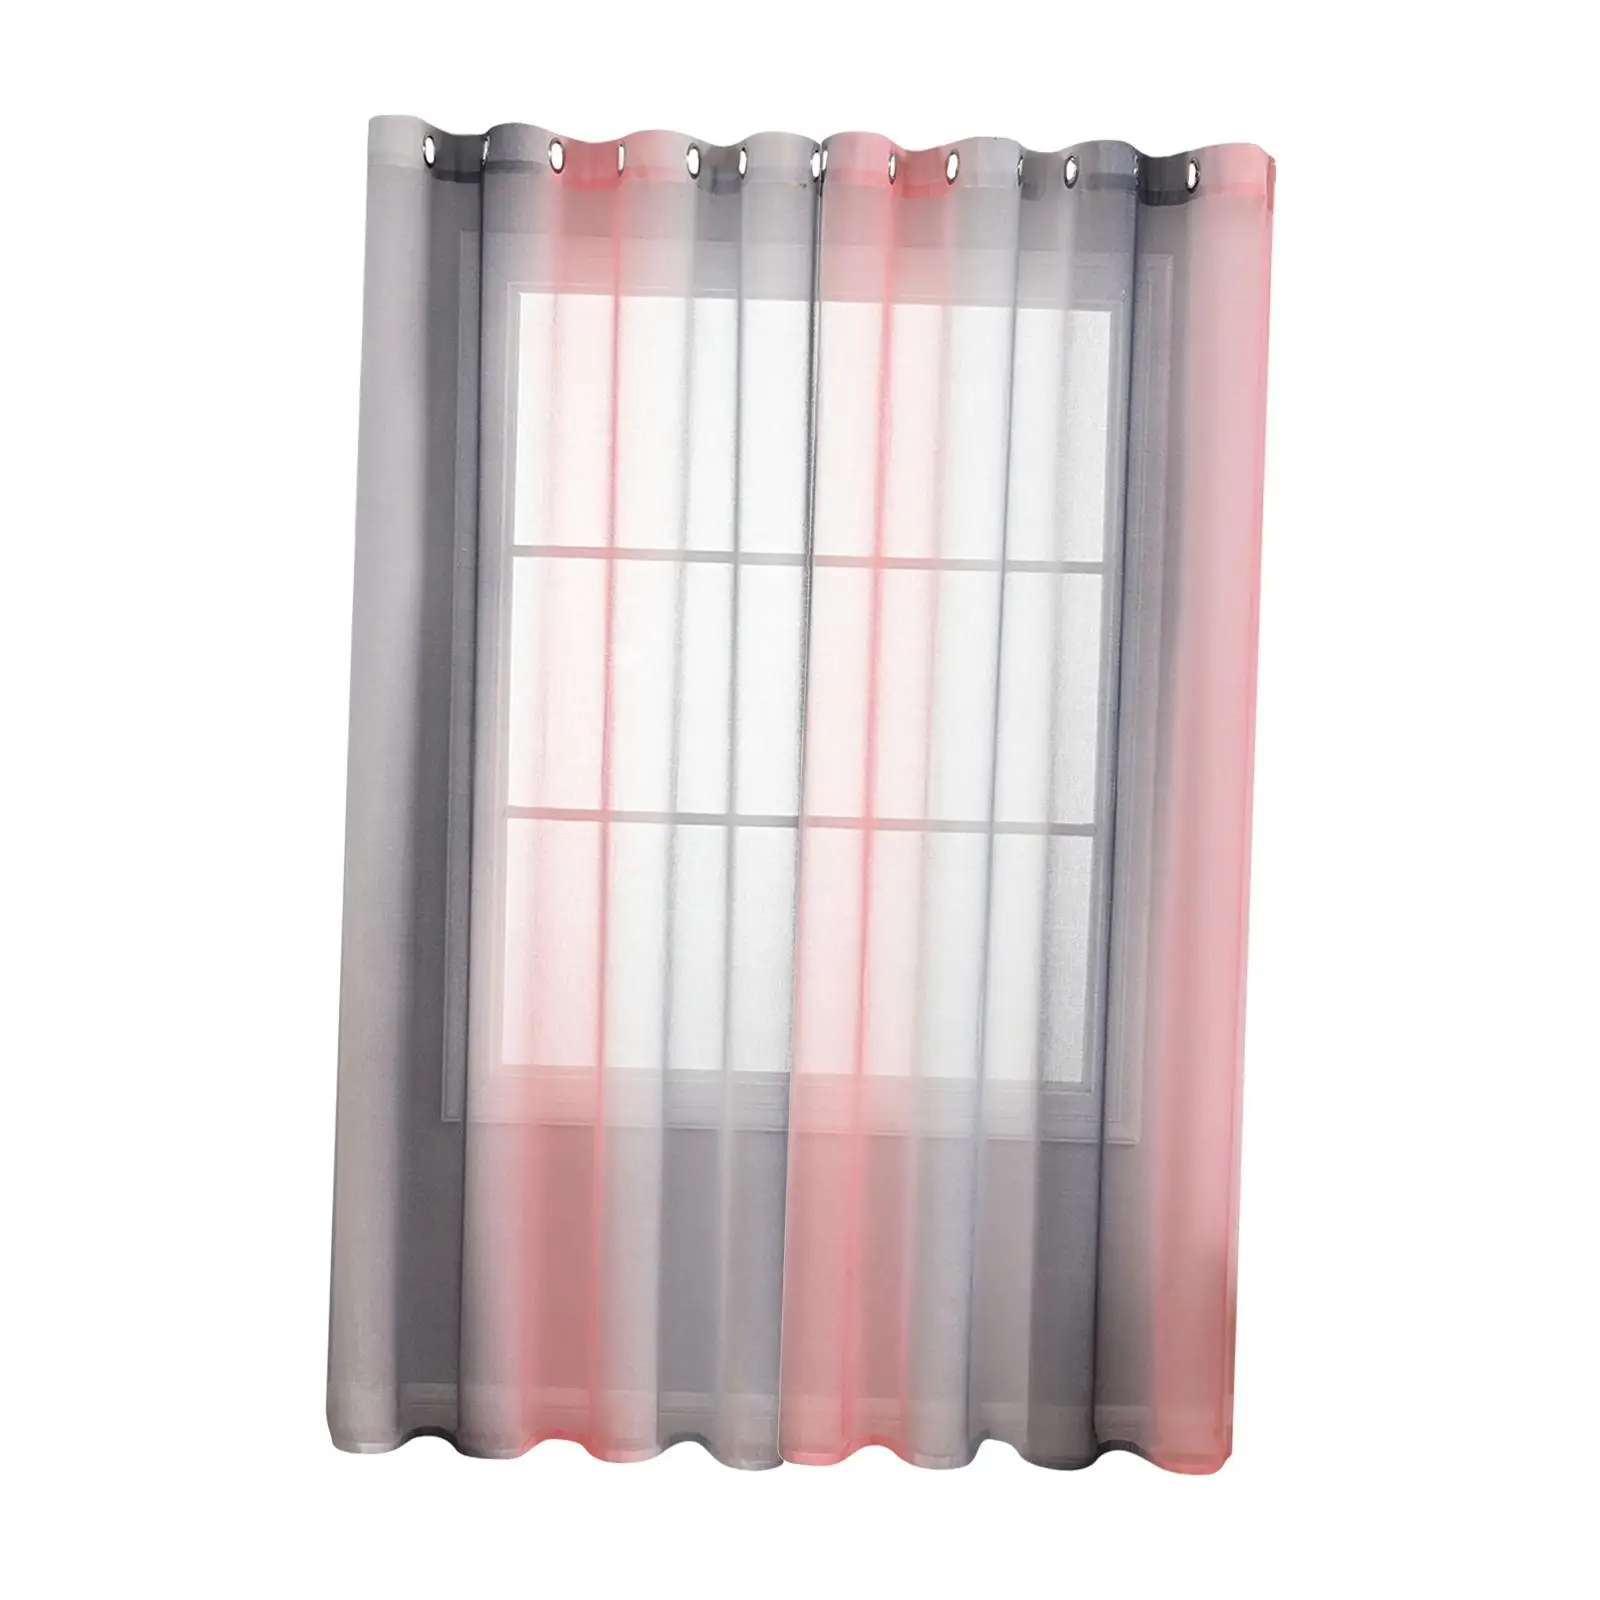 Transparent Voile Curtain Window Tulle Curtain for Sliding Glass Door Window